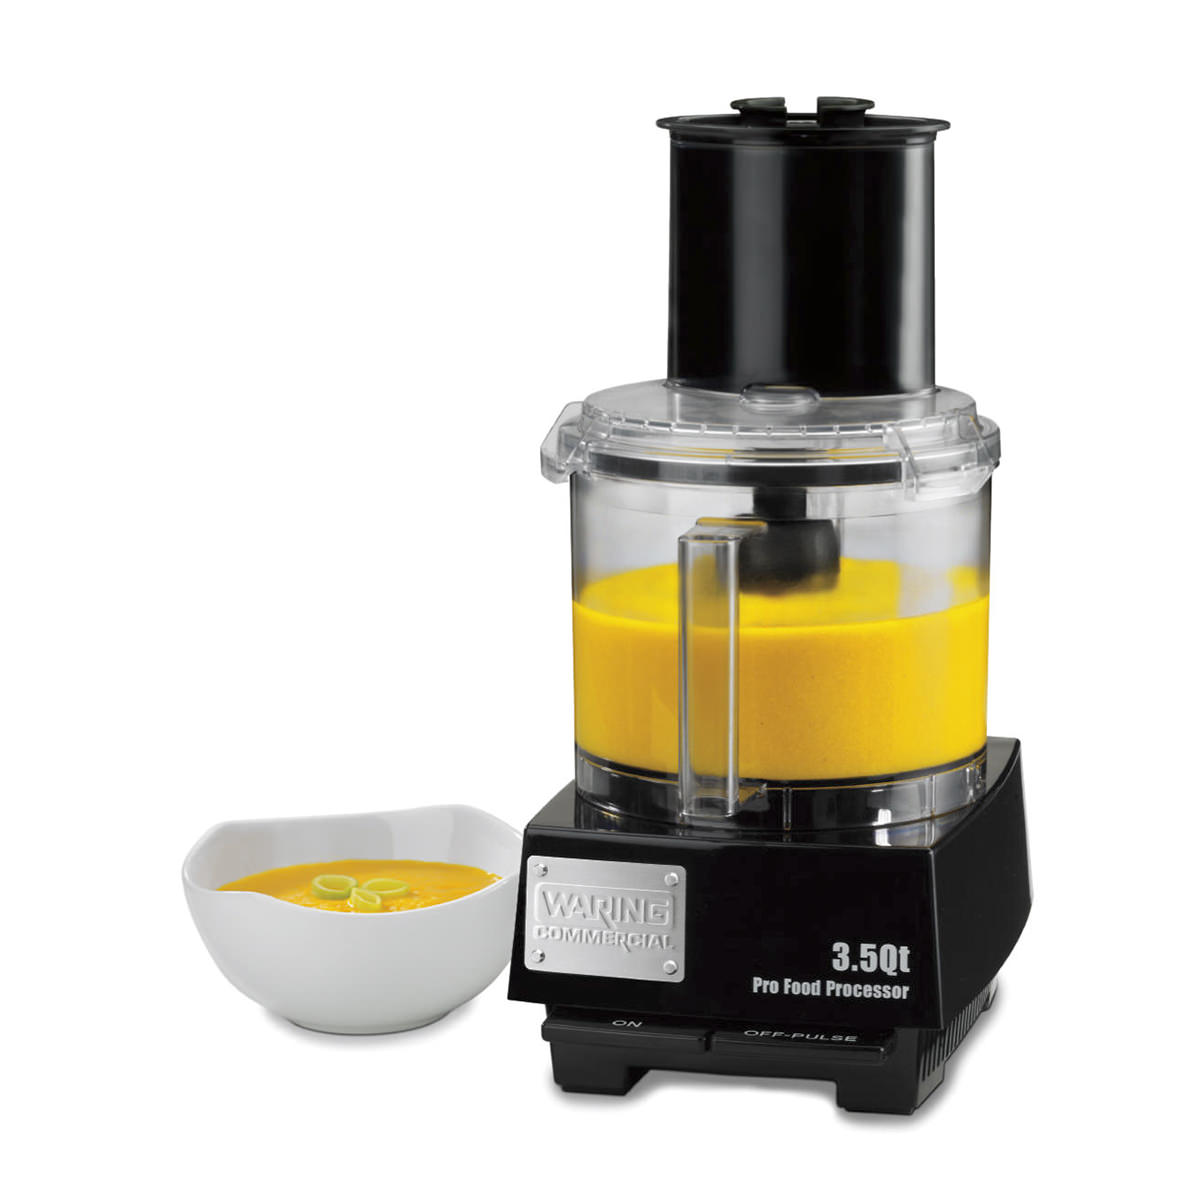 https://www.waringcommercialproducts.com/files/products/wfp14s-waring-food-processor-inset1.jpg